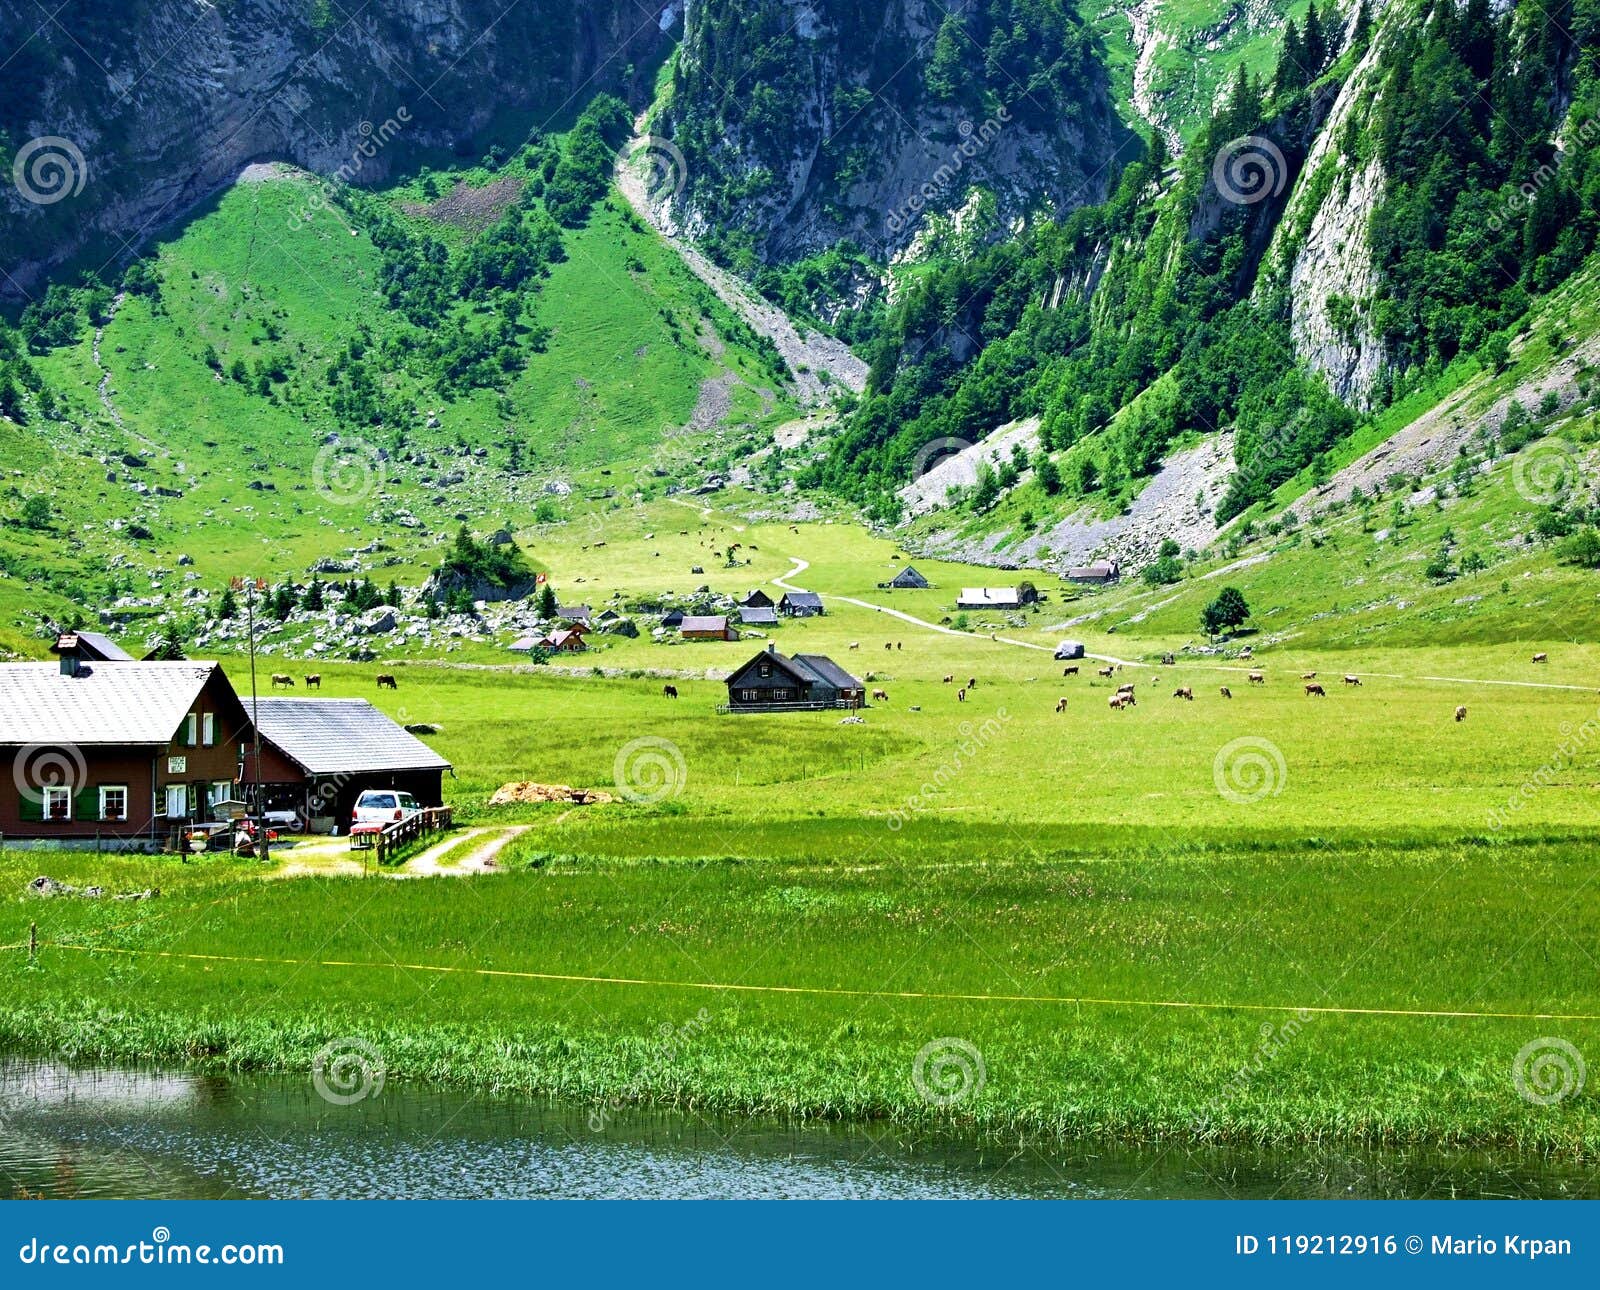 Ødelægge mad laver mad Mountain, Landscape, Alps, Nature, House, Mountains, Valley, Grass, Green,  Sky, Village, Austria, Alpine, Forest, Rural Stock Photo - Image of meadow,  mountains: 119212916